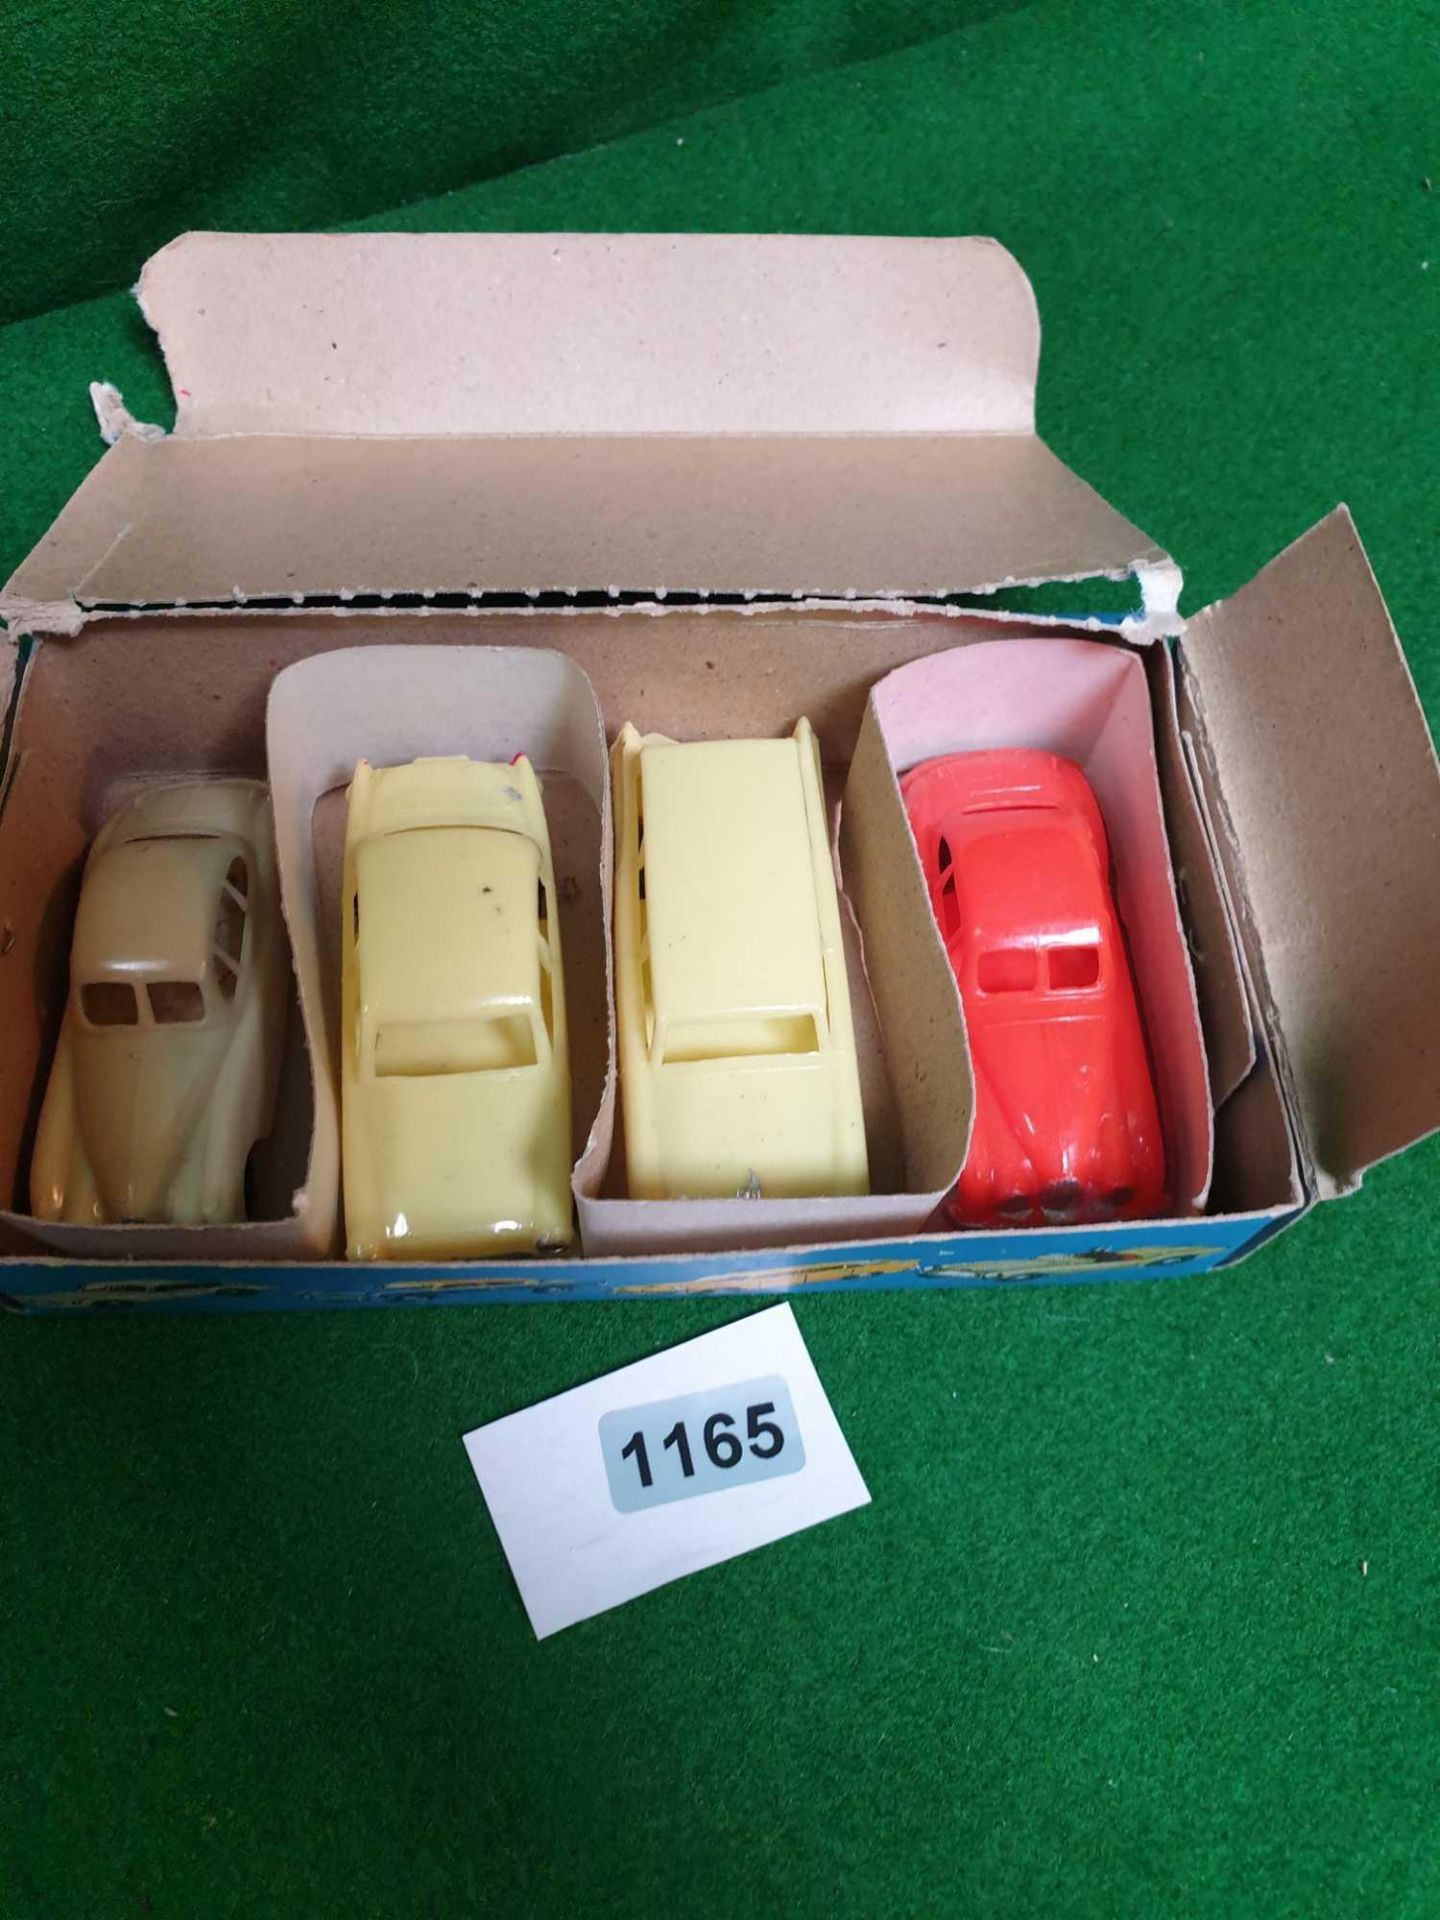 Blue Box Plastic Toy Cars â€“ Auto Series No. 7402. Made In Hong Kong Rare Very Good Condition - Image 2 of 2